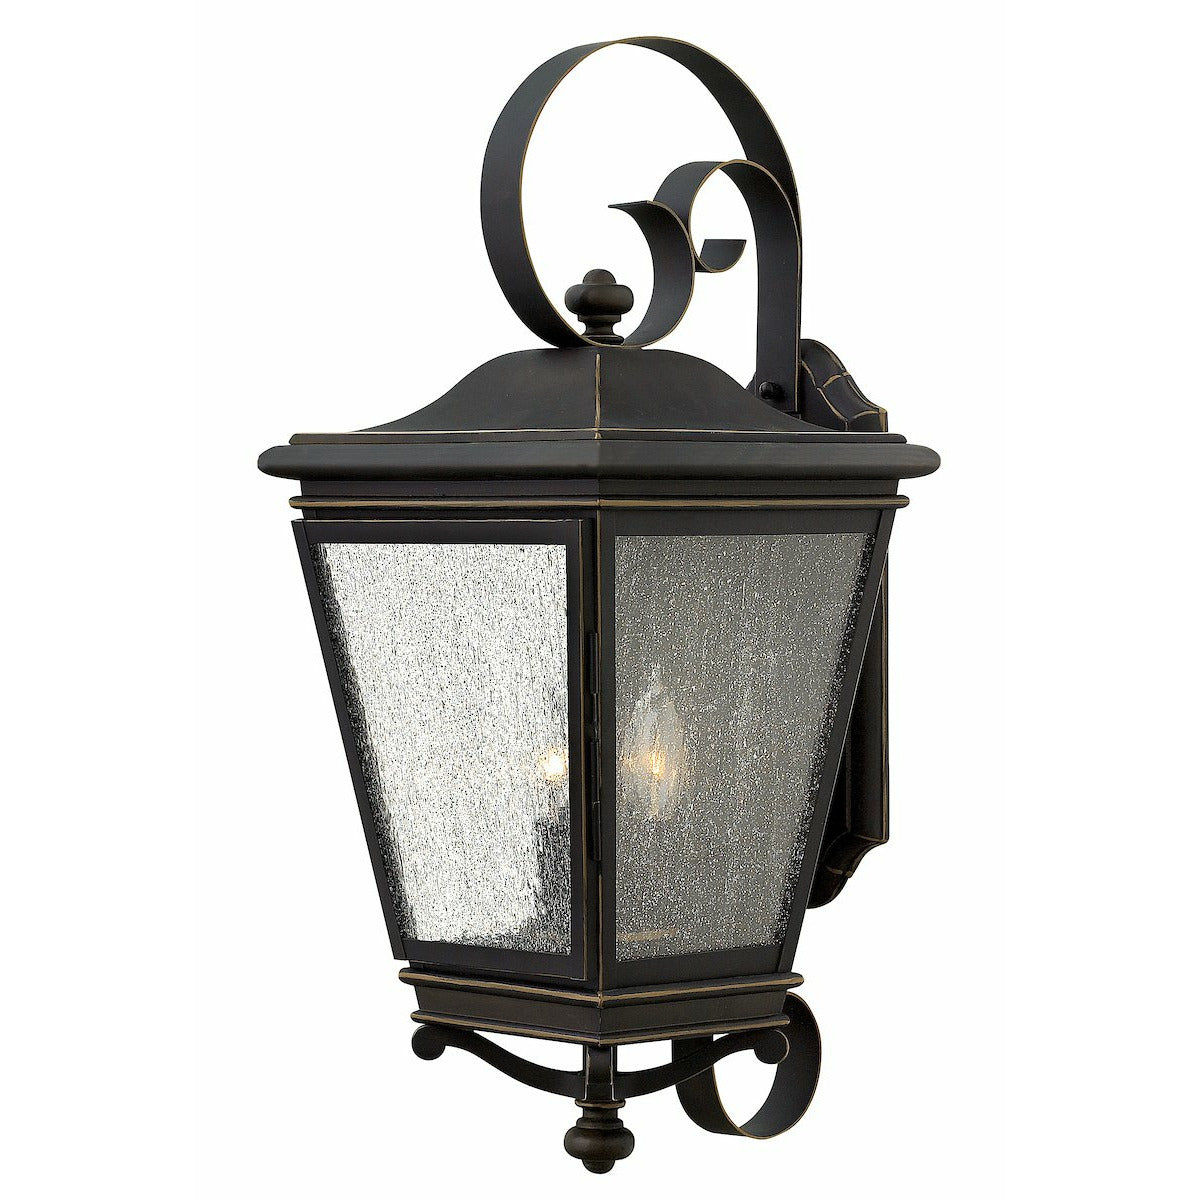 Lincoln Outdoor Wall Light Oil Rubbed Bronze